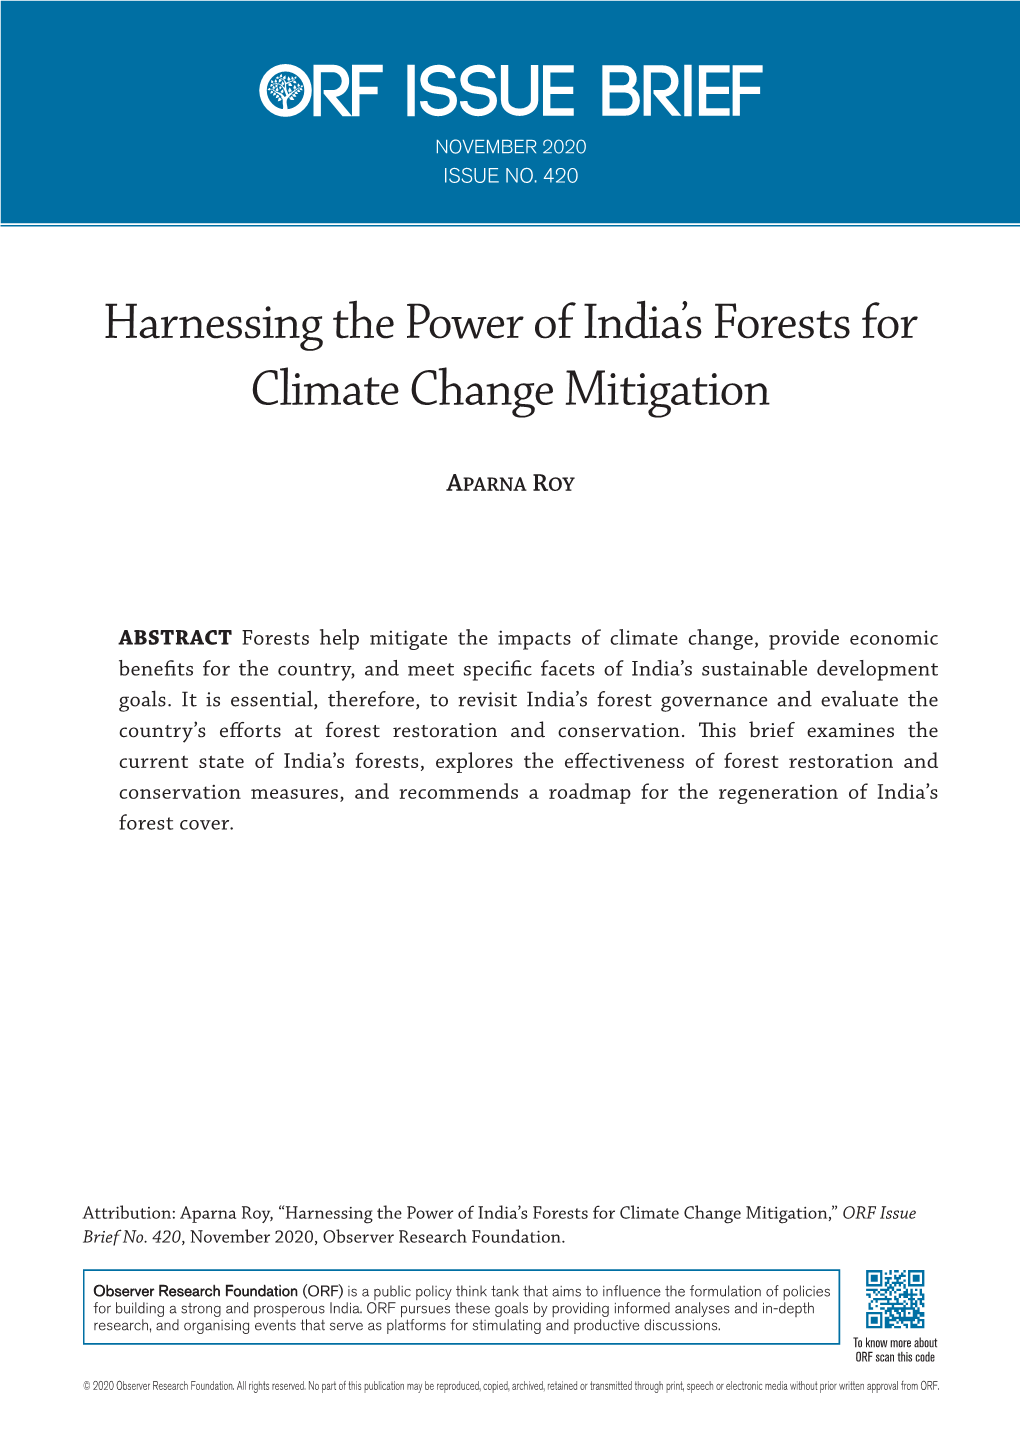 Harnessing the Power of India's Forests for Climate Change Mitigation